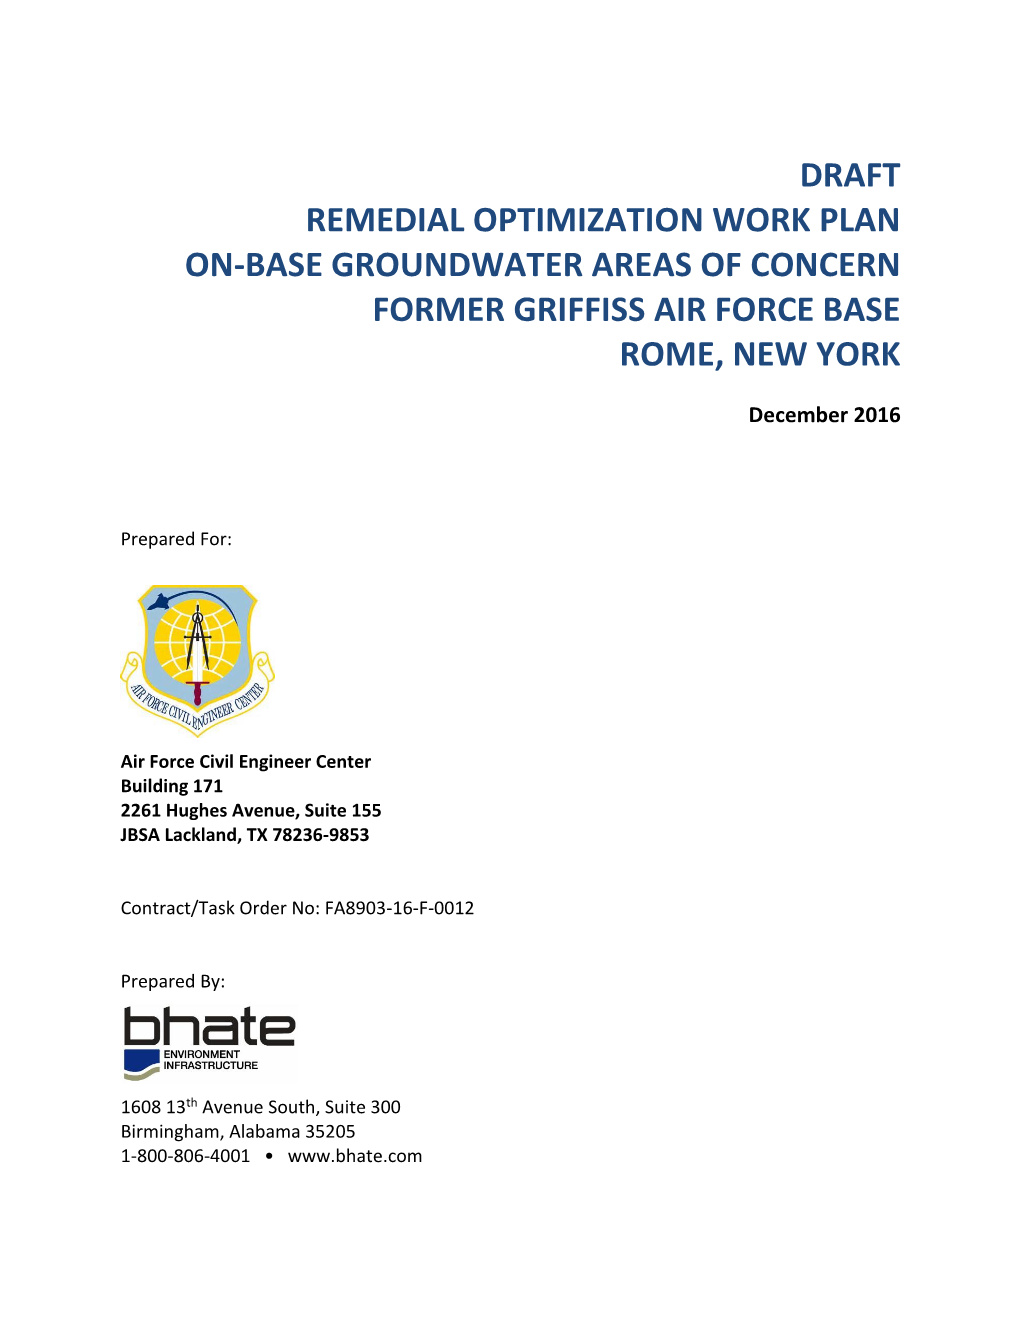 Draft Remedial Optimization Work Plan On-Base Groundwater Areas of Concern Former Griffiss Air Force Base Rome, New York